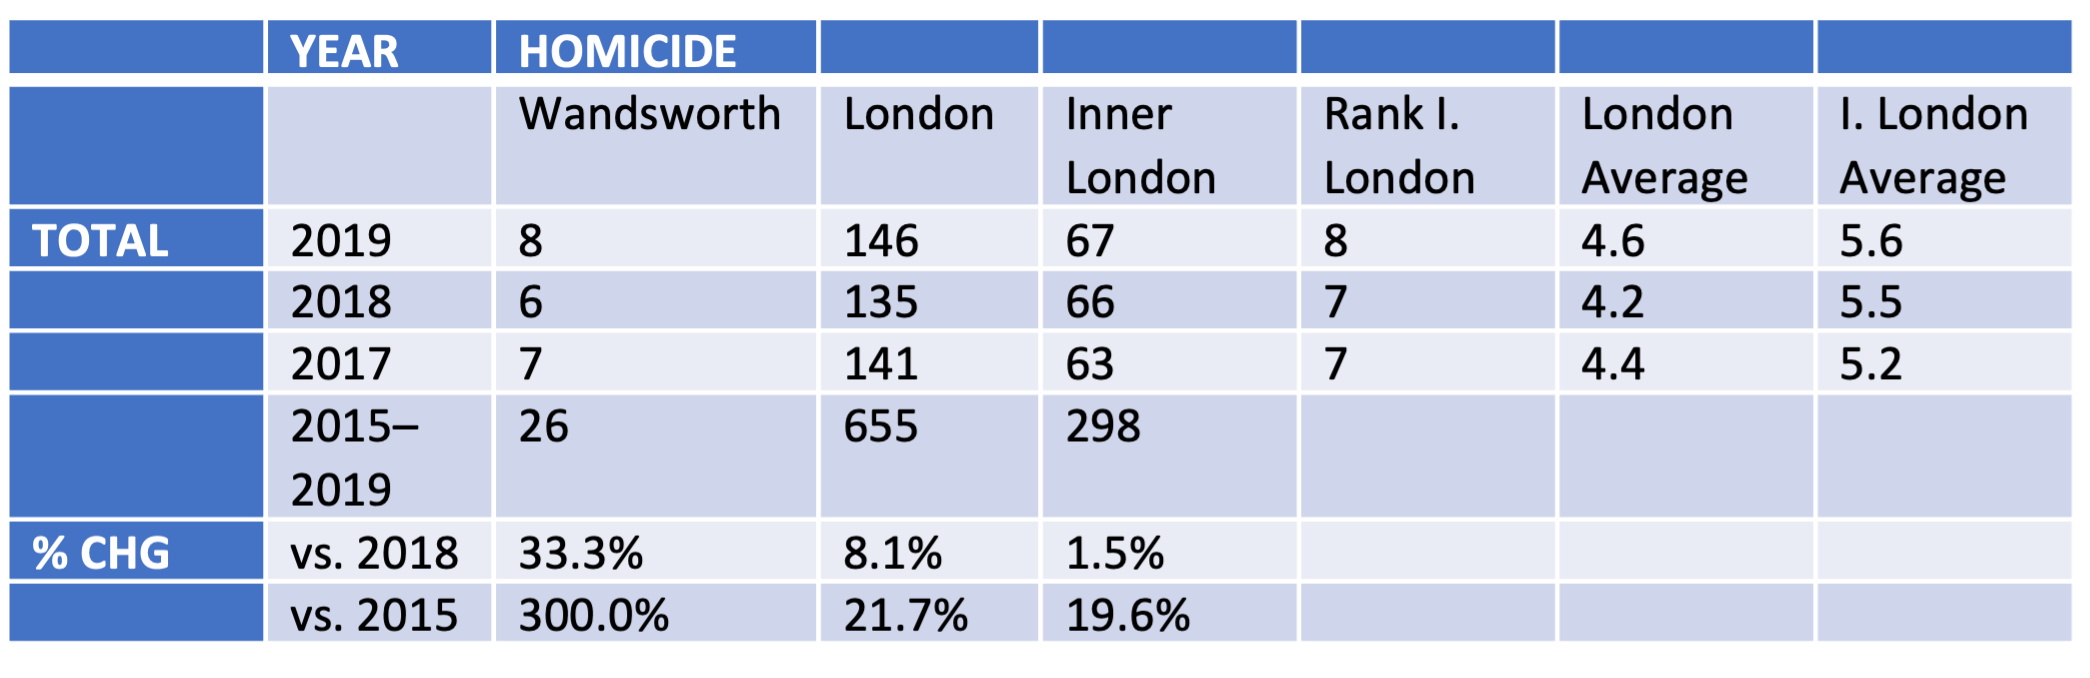 Trends in homicide, and percentage change over time in Wandsworth 2015–2020, London and Inner London